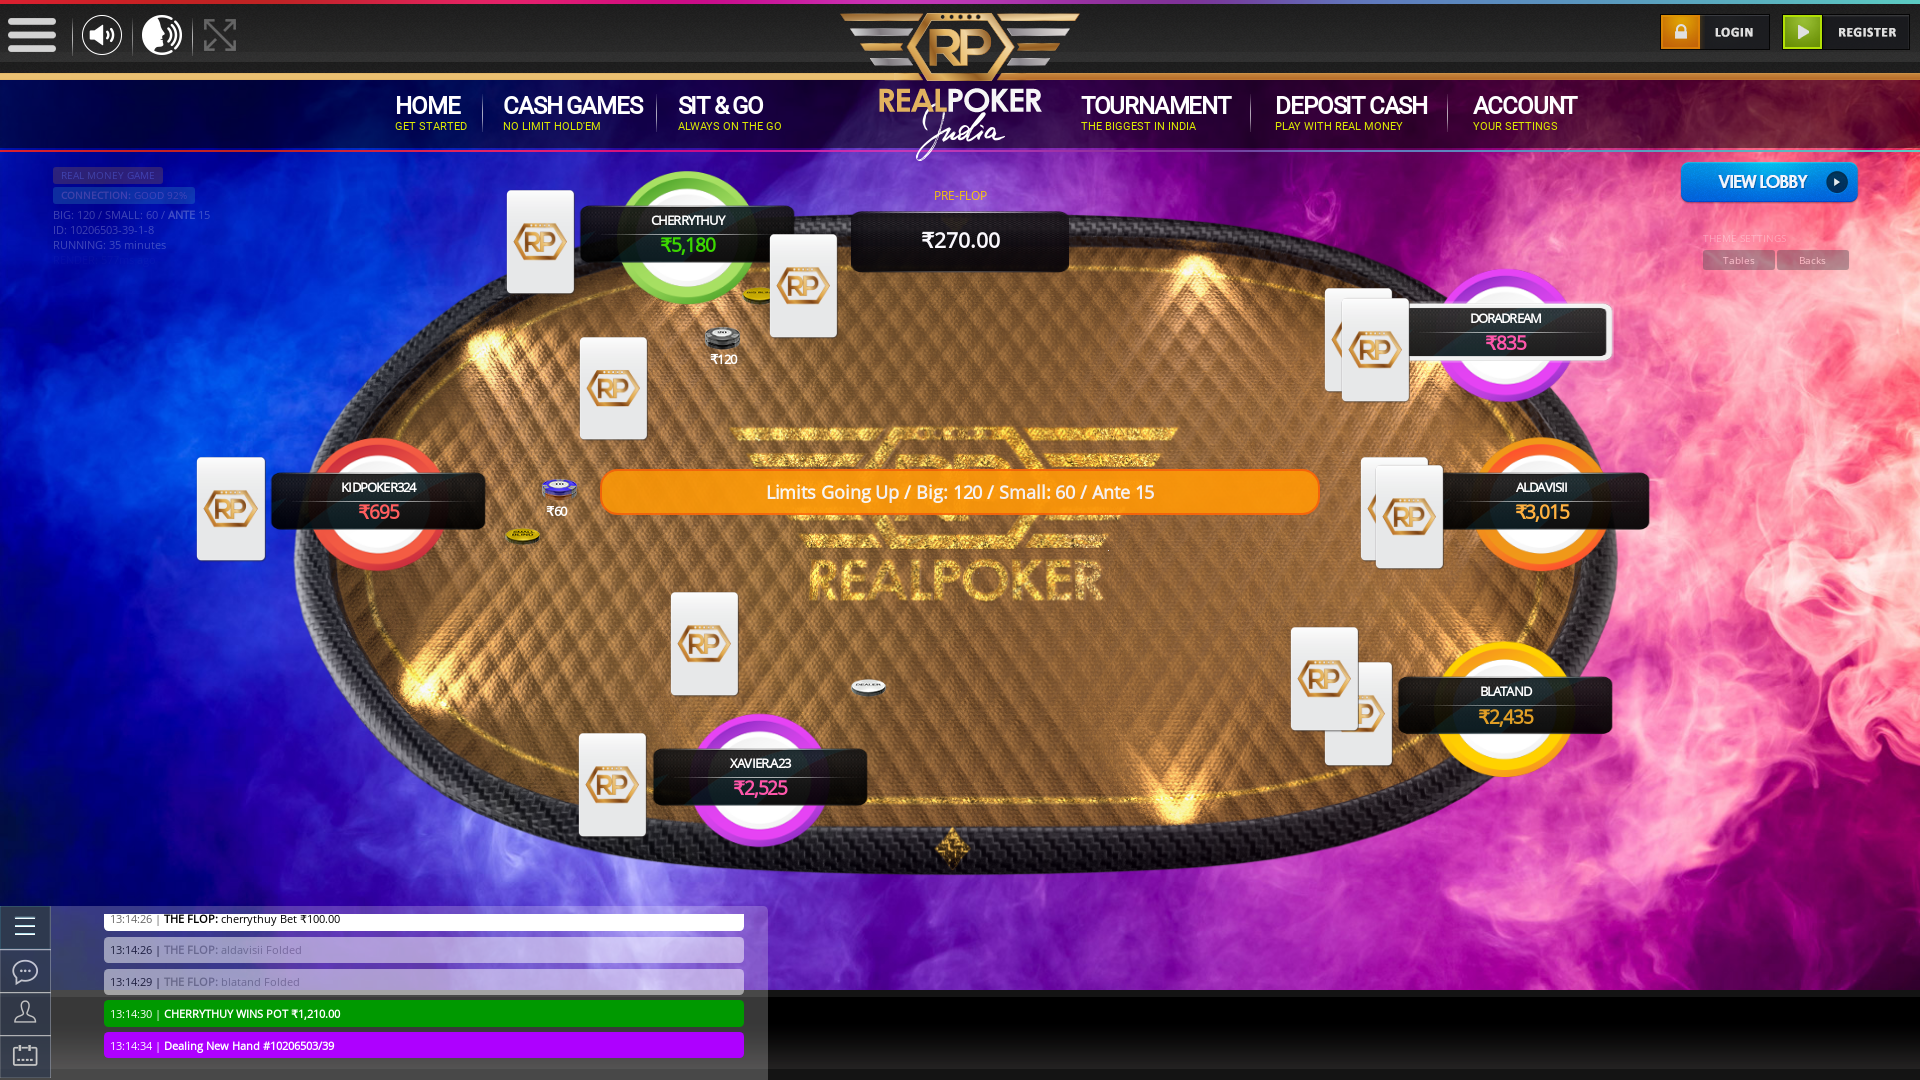 Howrah, Kolkata poker table on a 10 player table in the 35th minute of the meeting